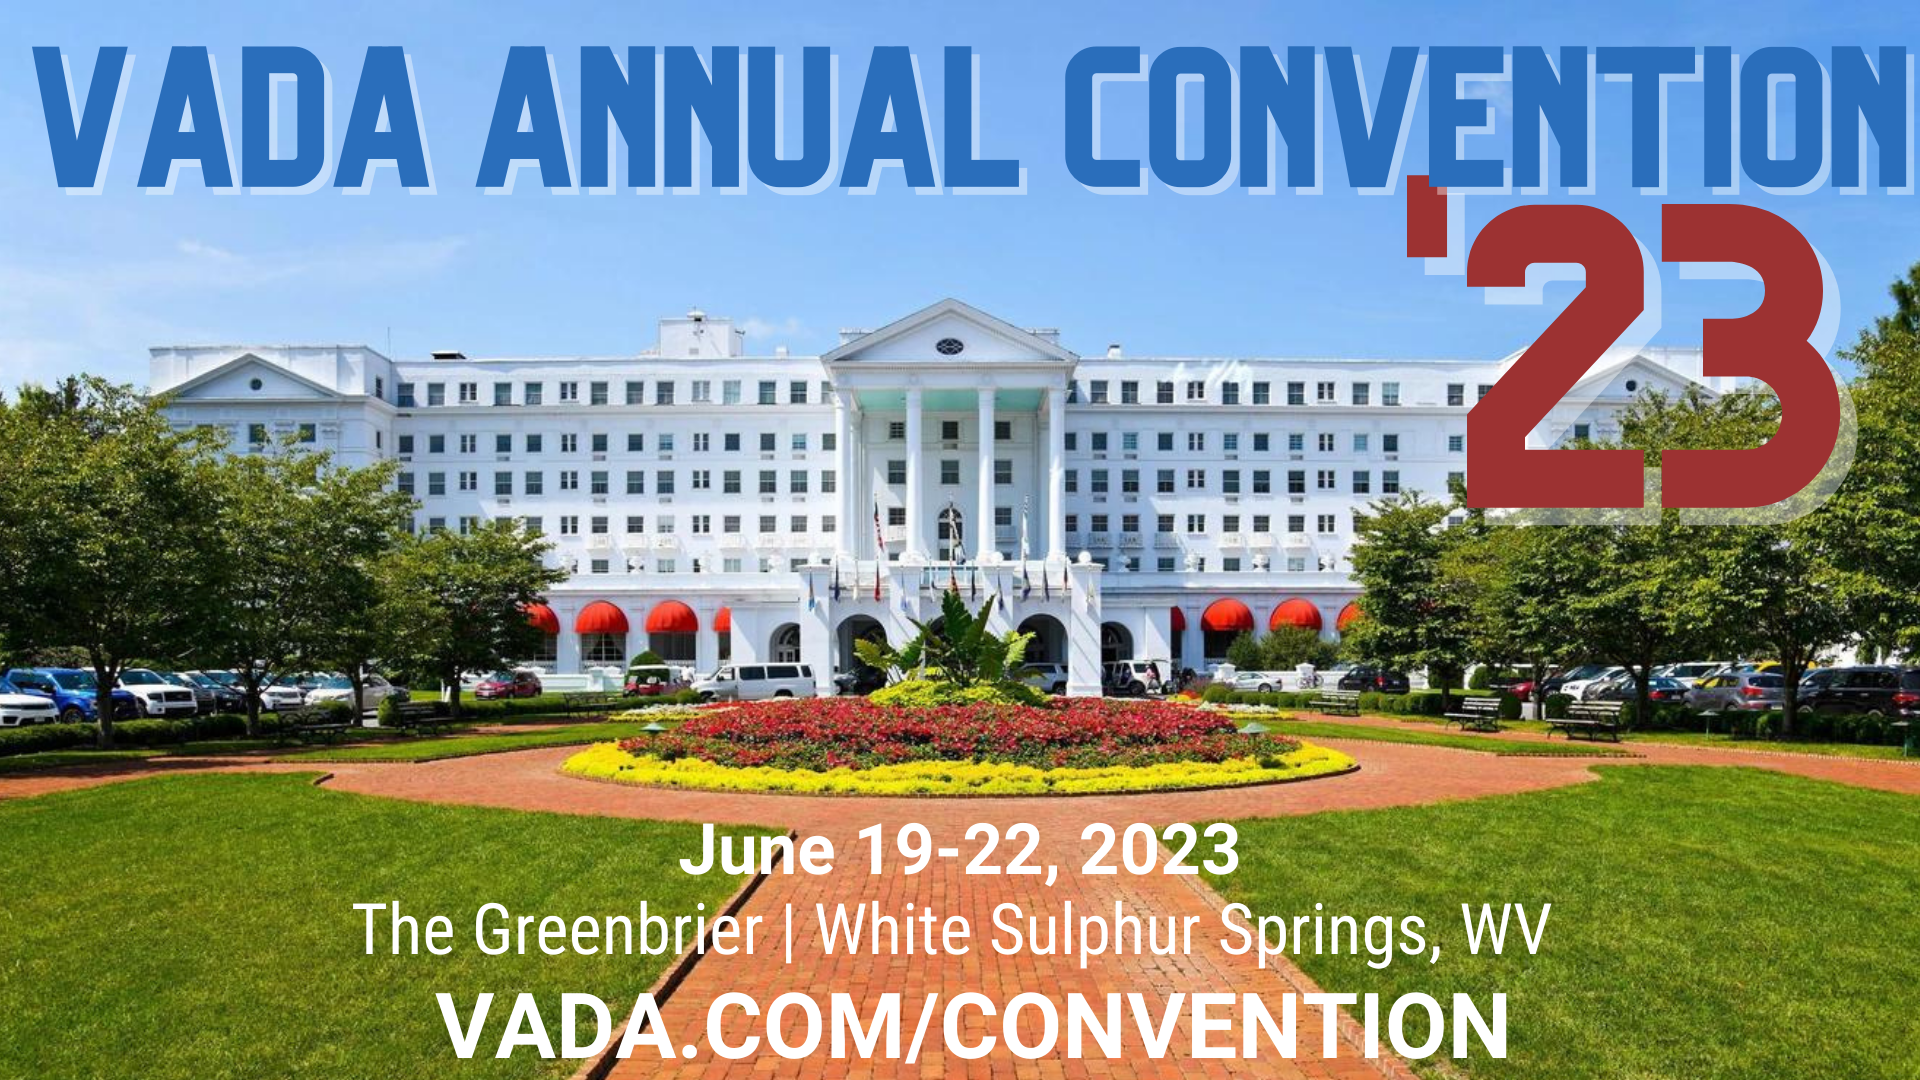 VADA Annual Convention 2023